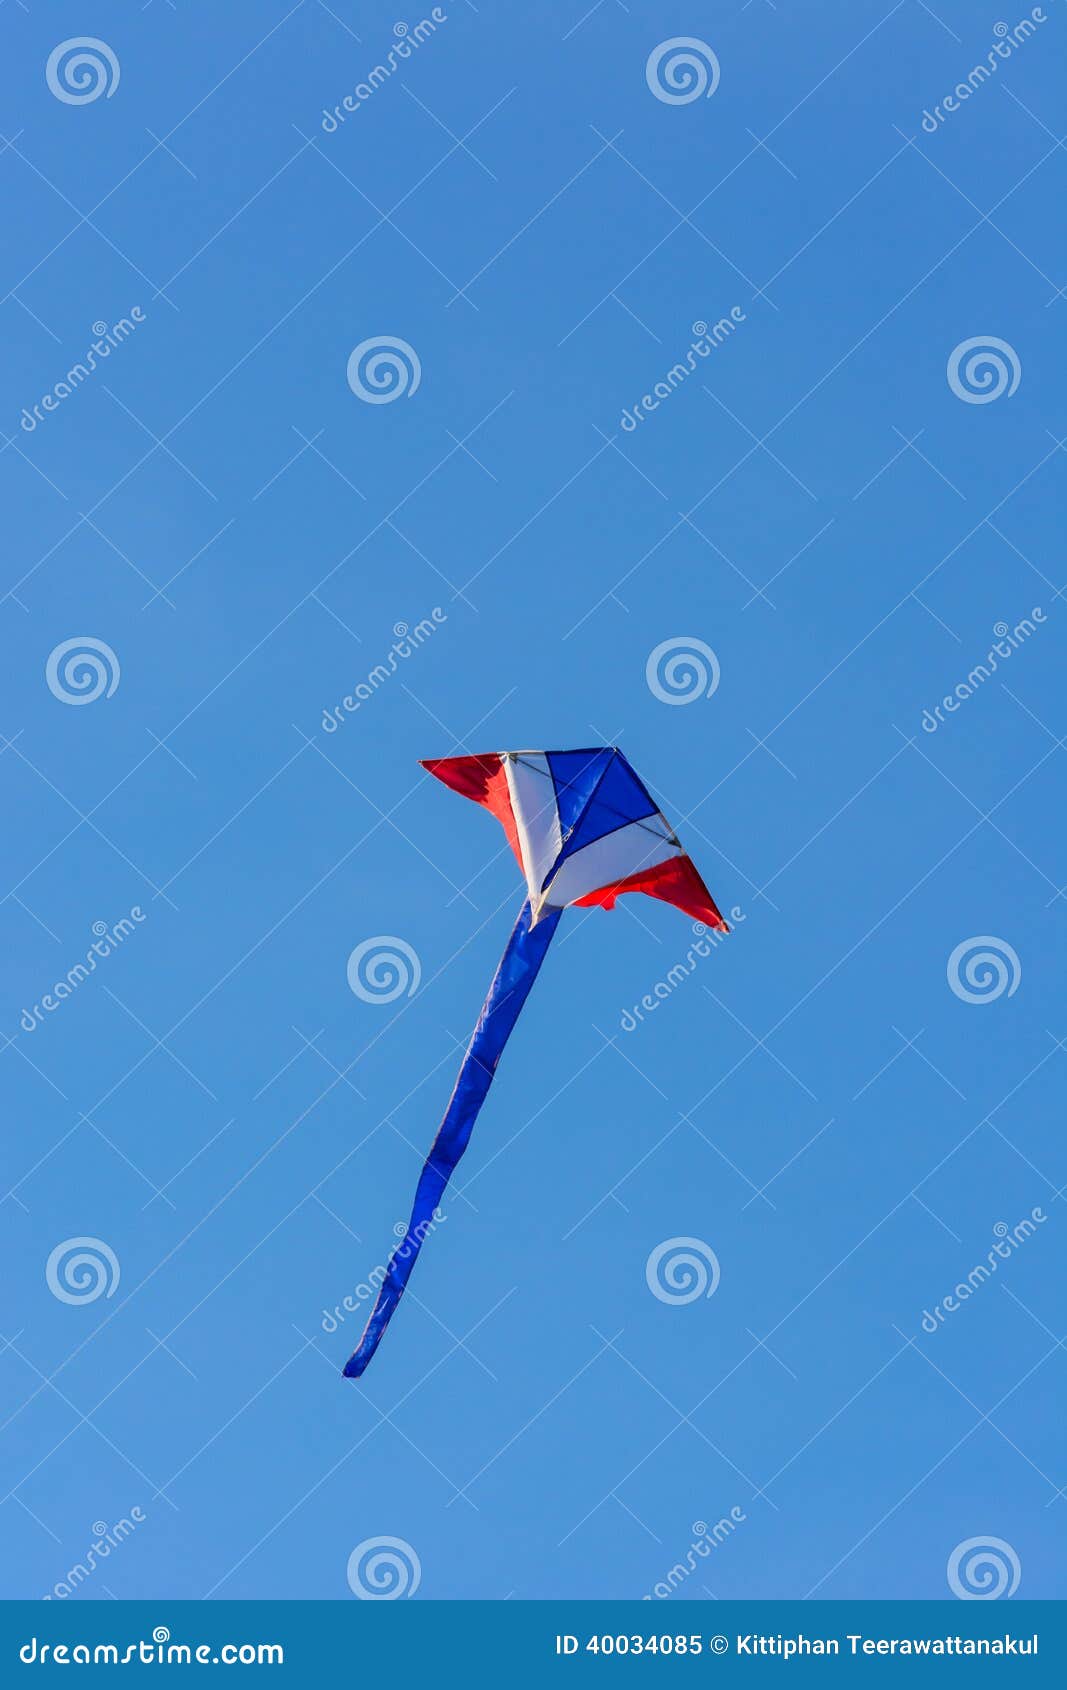 Flying Kite stock image. Image of copy, space, solitude - 40034085